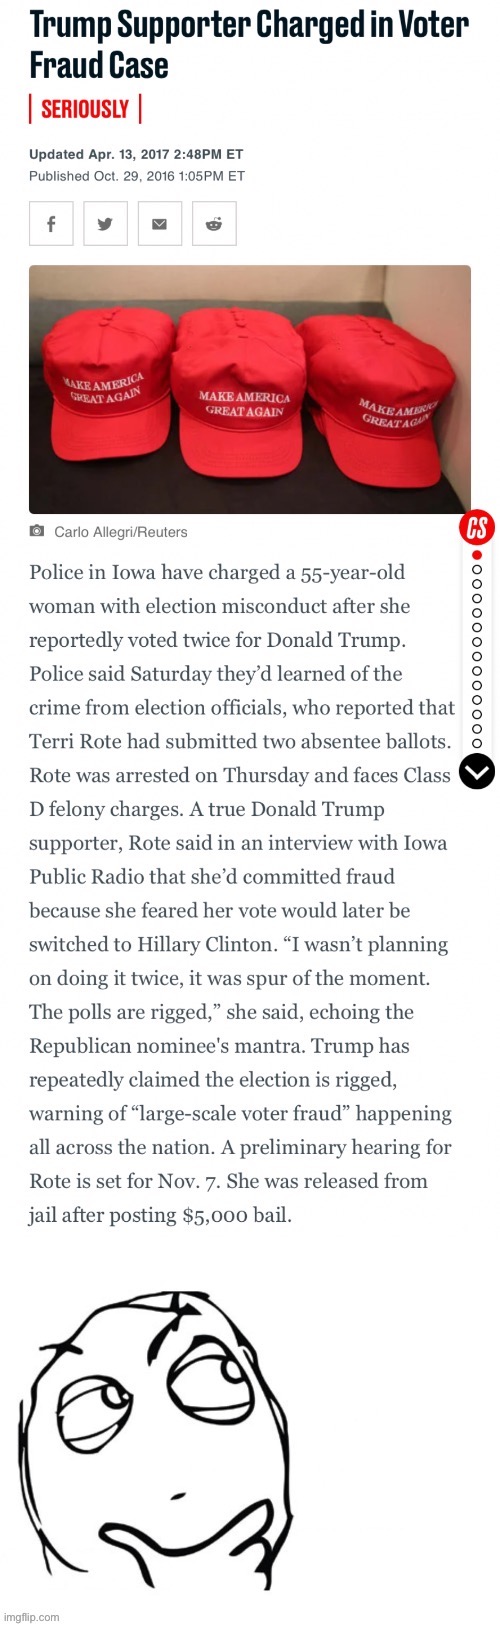 [here at Politics_Redux, we unearth real evidence of voter fraud] | image tagged in trump supporter voter fraud,voter fraud,election fraud,rigged elections,conservative hypocrisy,hypocrisy | made w/ Imgflip meme maker